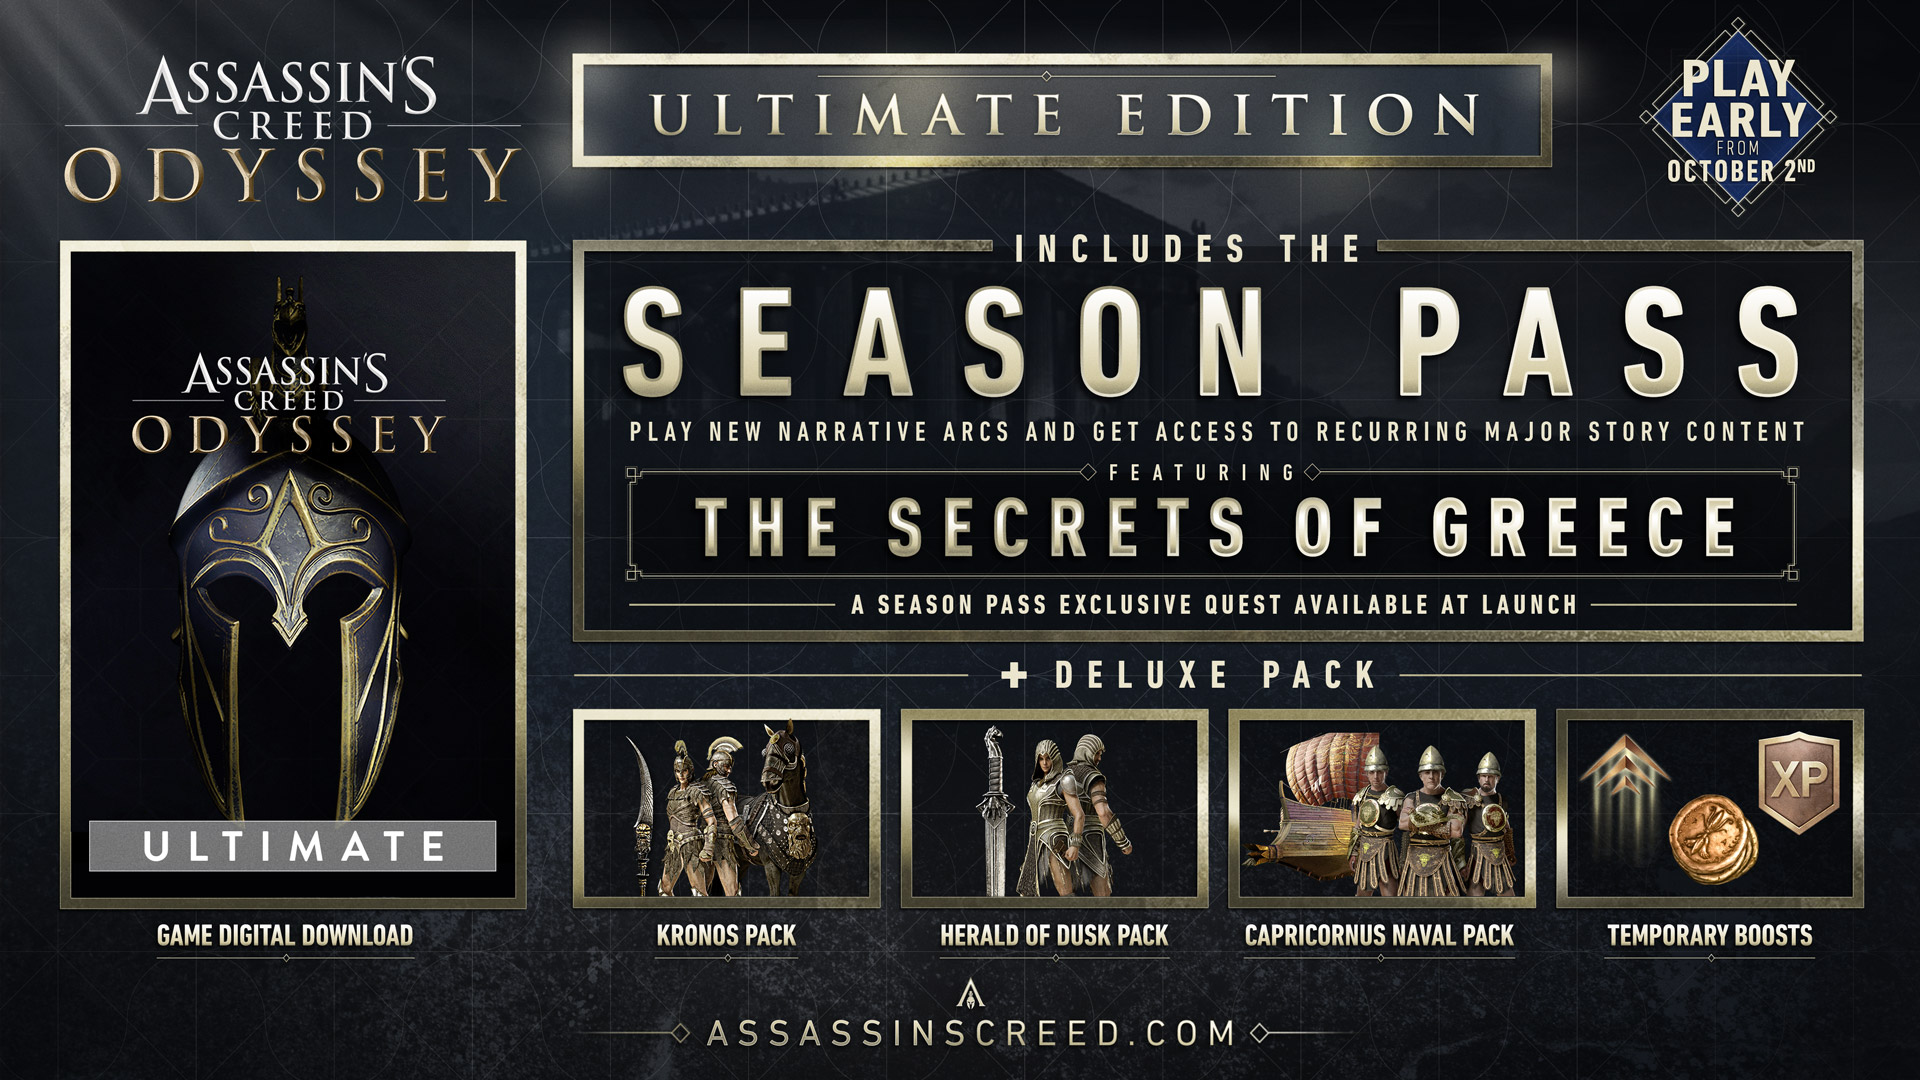 of Assassin's Creed Odyssey editions | Ubisoft Help